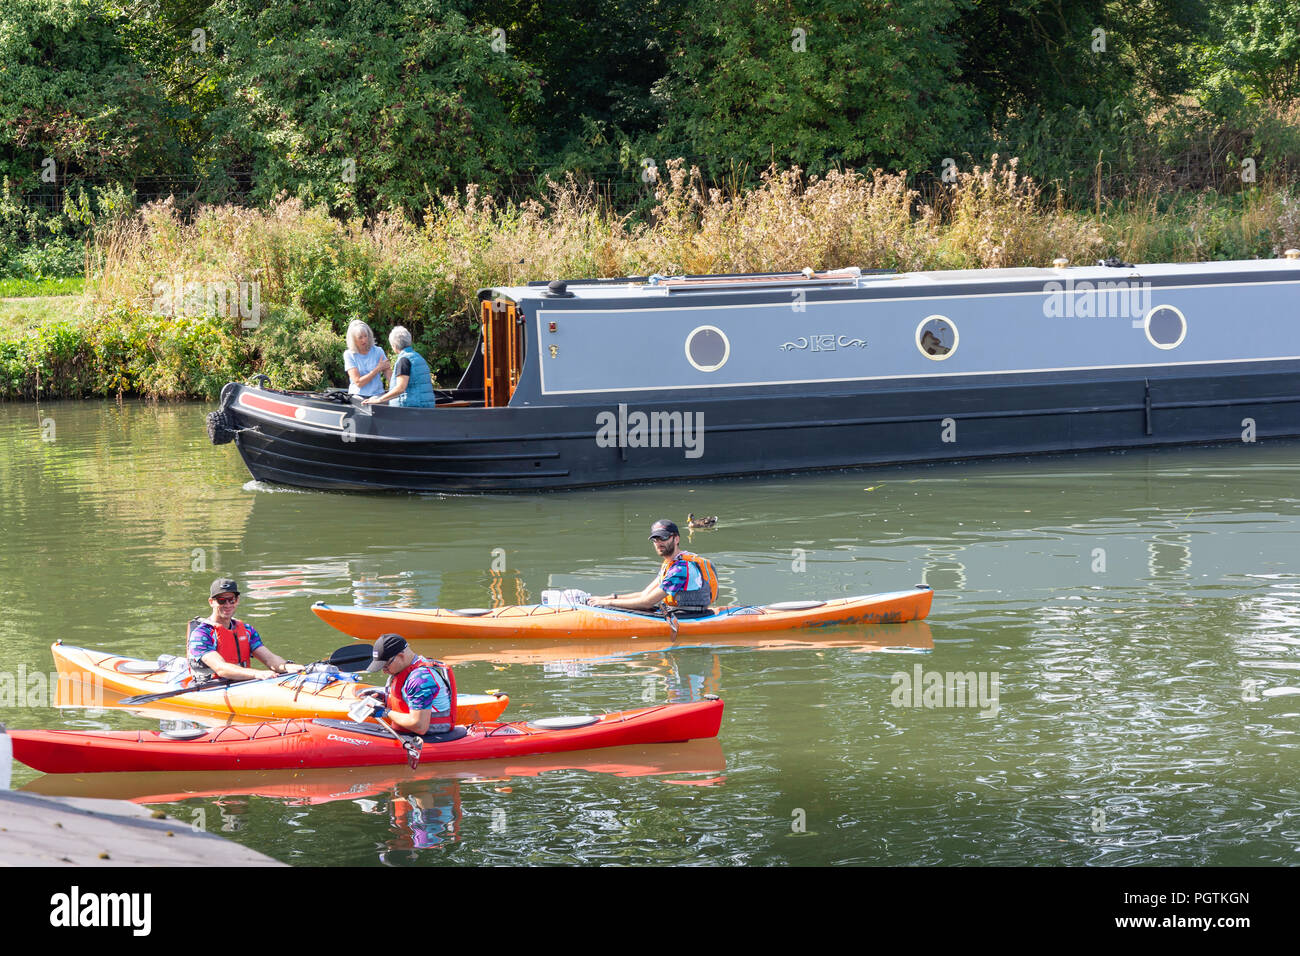 Kayaks and canal boat on River Thames, The Riverside, Lechlade-on-Thames, Gloucestershire, England, United Kingdom Stock Photo